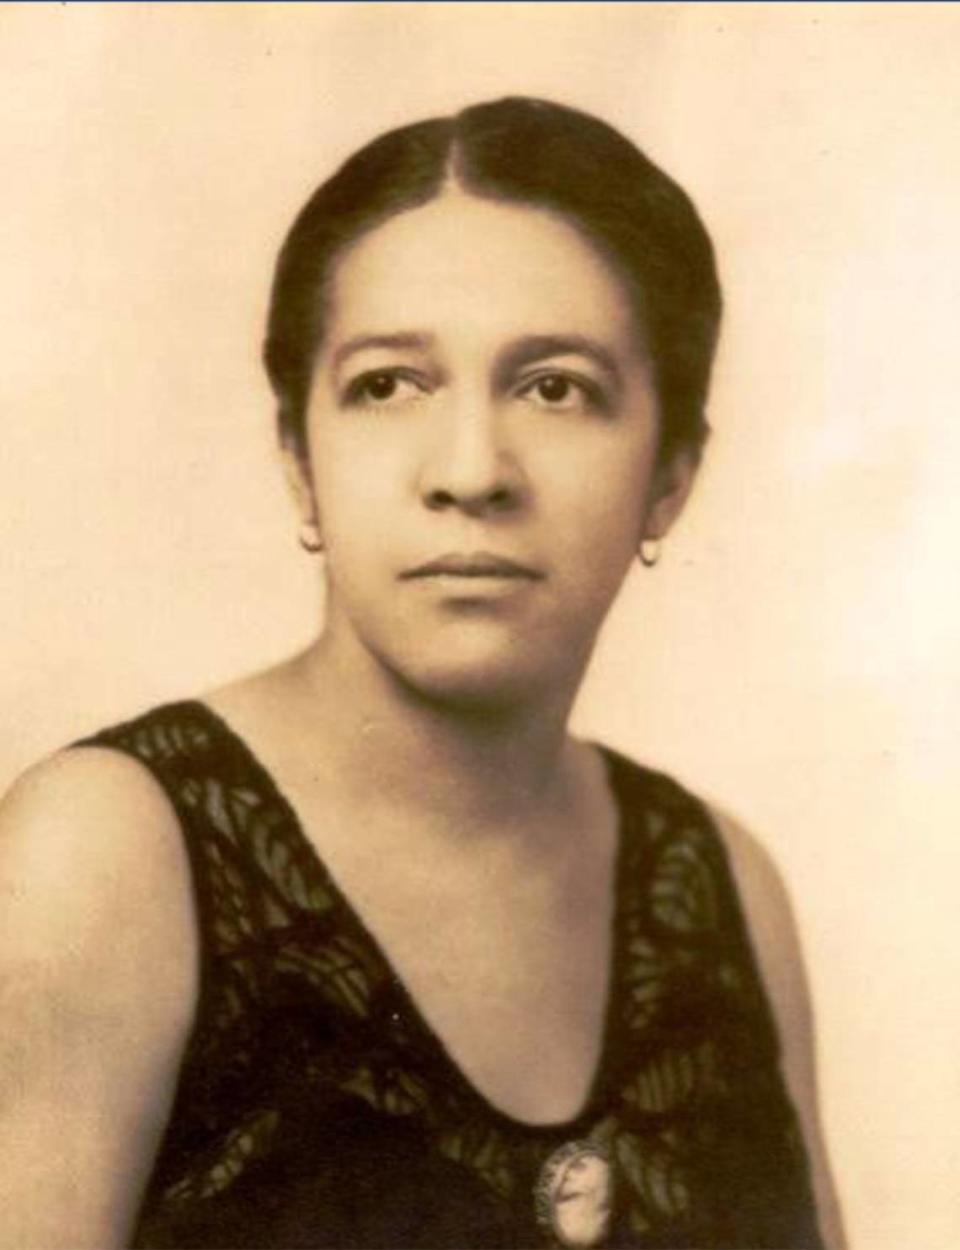 Modjeska Simkins was a prominent civil rights activist in Columbia, where she helped found the S.C. chapter of the NAACP and served as its secretary for 16 years, leading legal challenges against segregation.